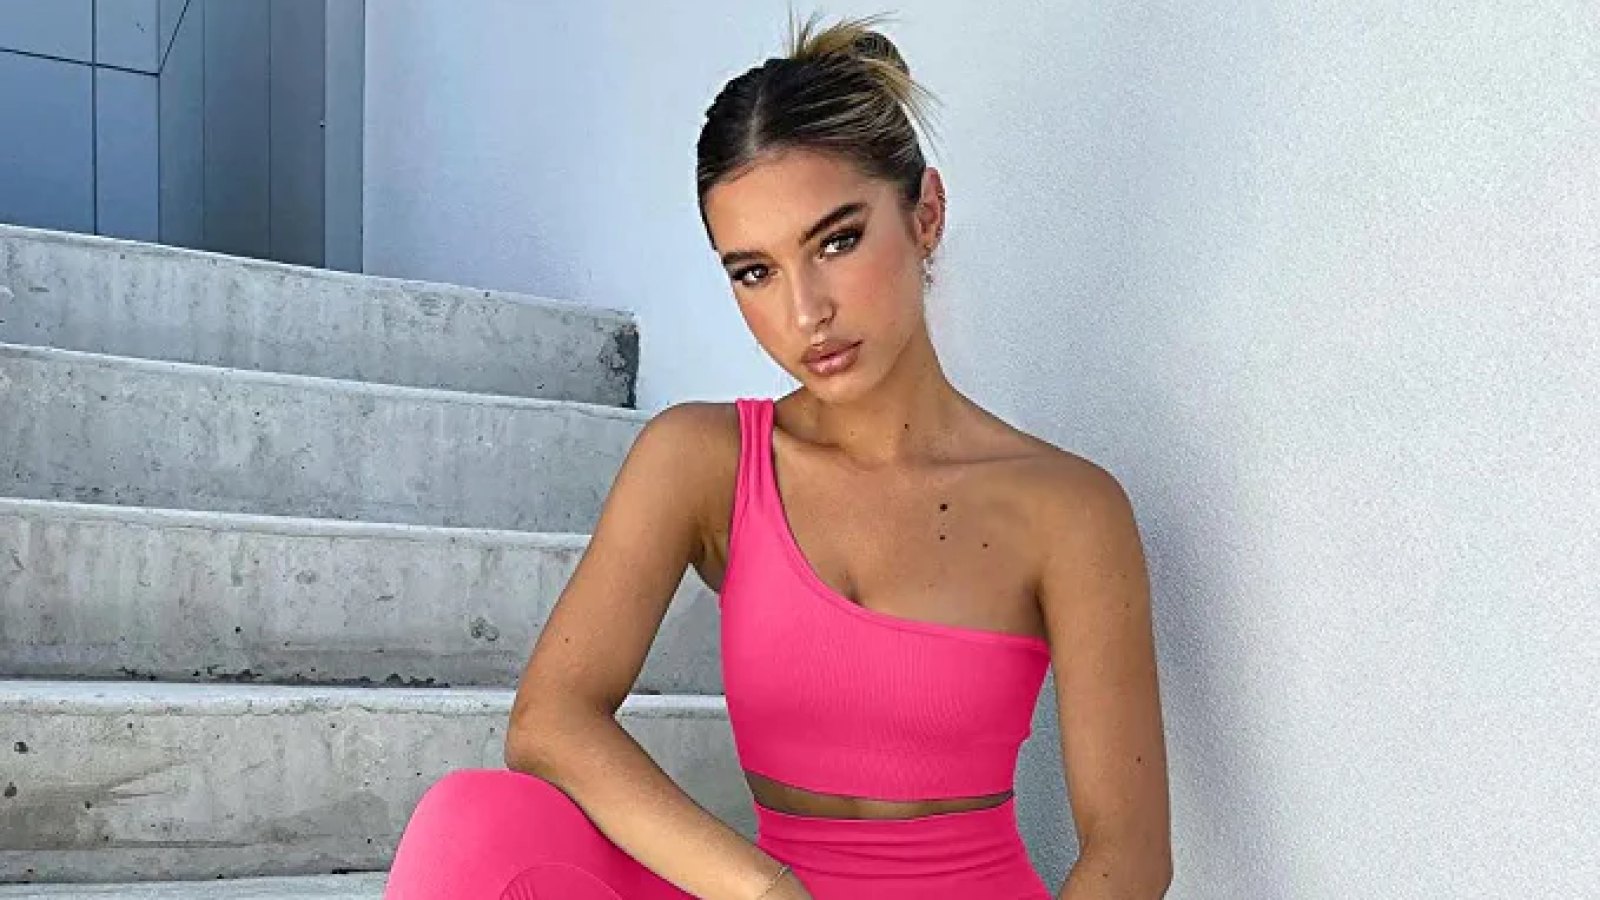 6 Matching Activewear Sets to Channel Your Inner Fitness Blogger